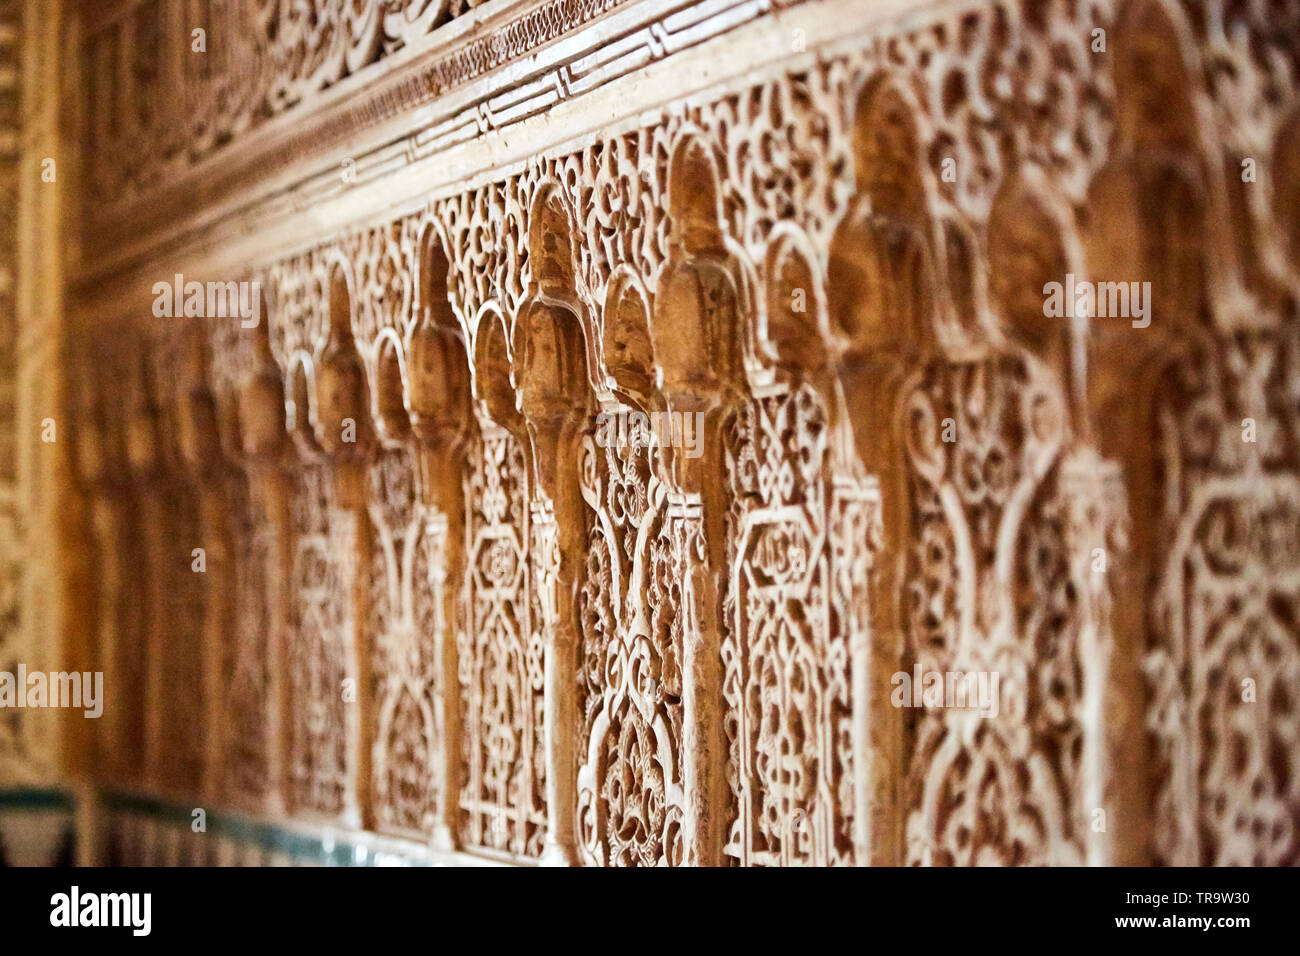 Intricate carvings in wall at Alhambra, in Granada, Spain. Stock Photo